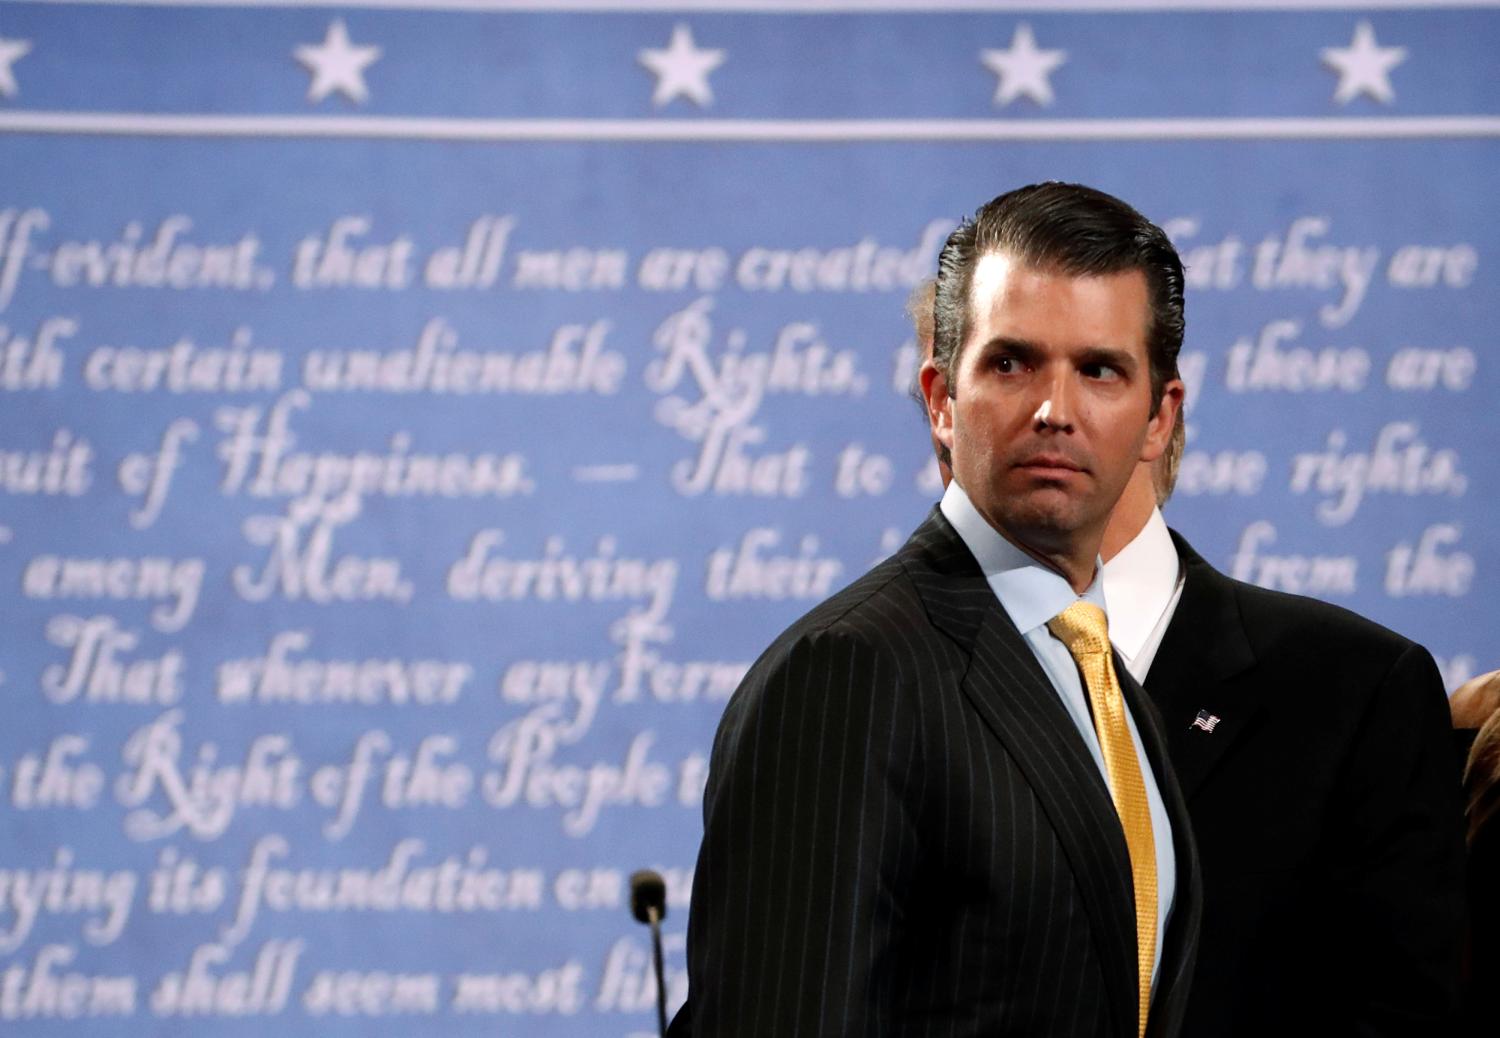 Donald Trump Jr. stands onstage with his father